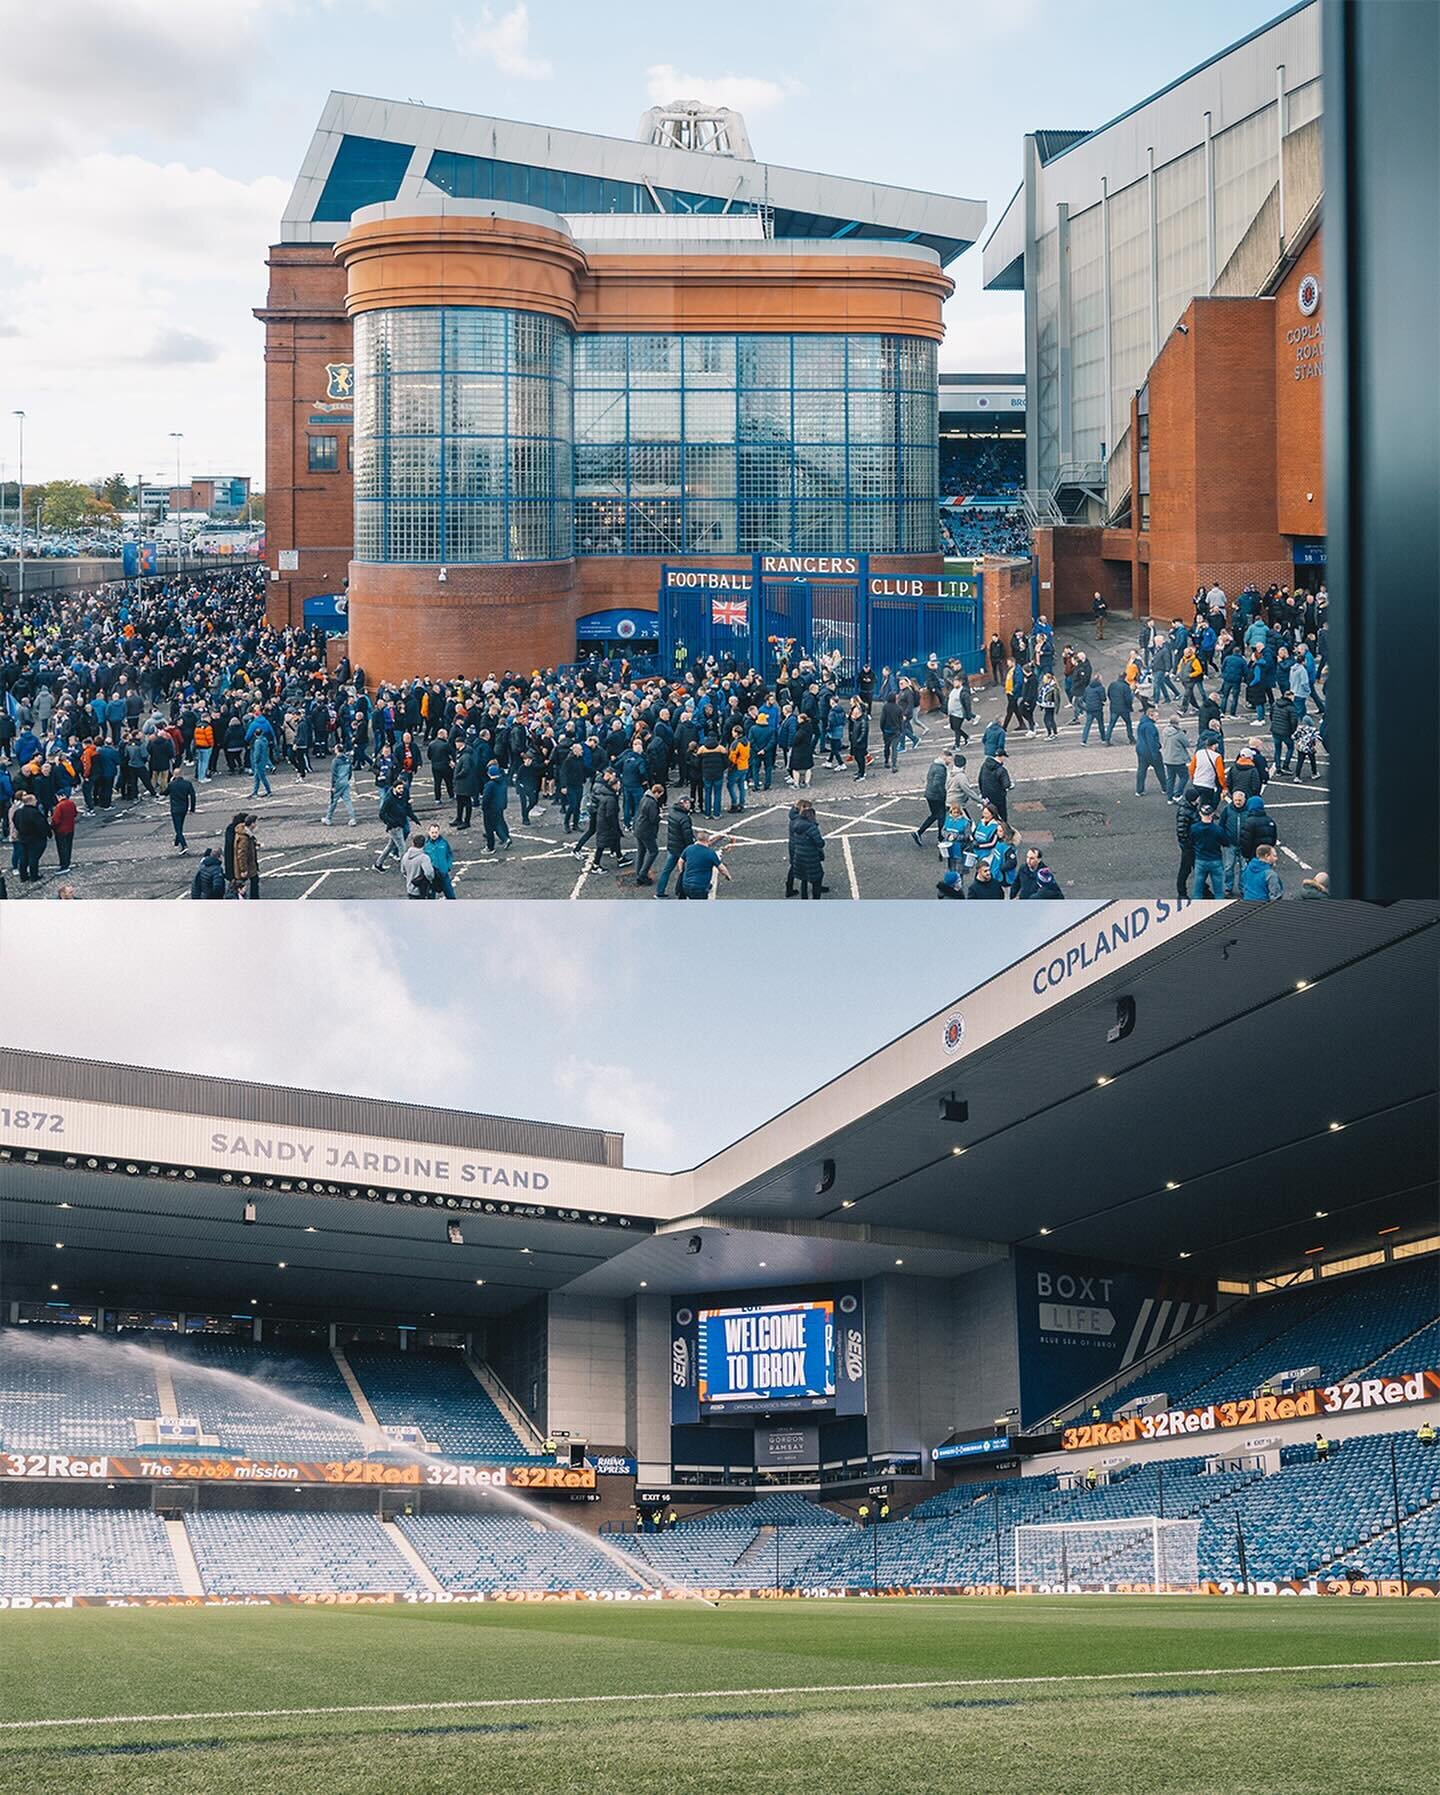 @rangersfc asked us to create a fresh set of photography for their hospitality suites and restaurants to be used on their website and brochures. Mission accomplished. 

It&rsquo;s amazing to have worked with one of the world&rsquo;s most historic foo